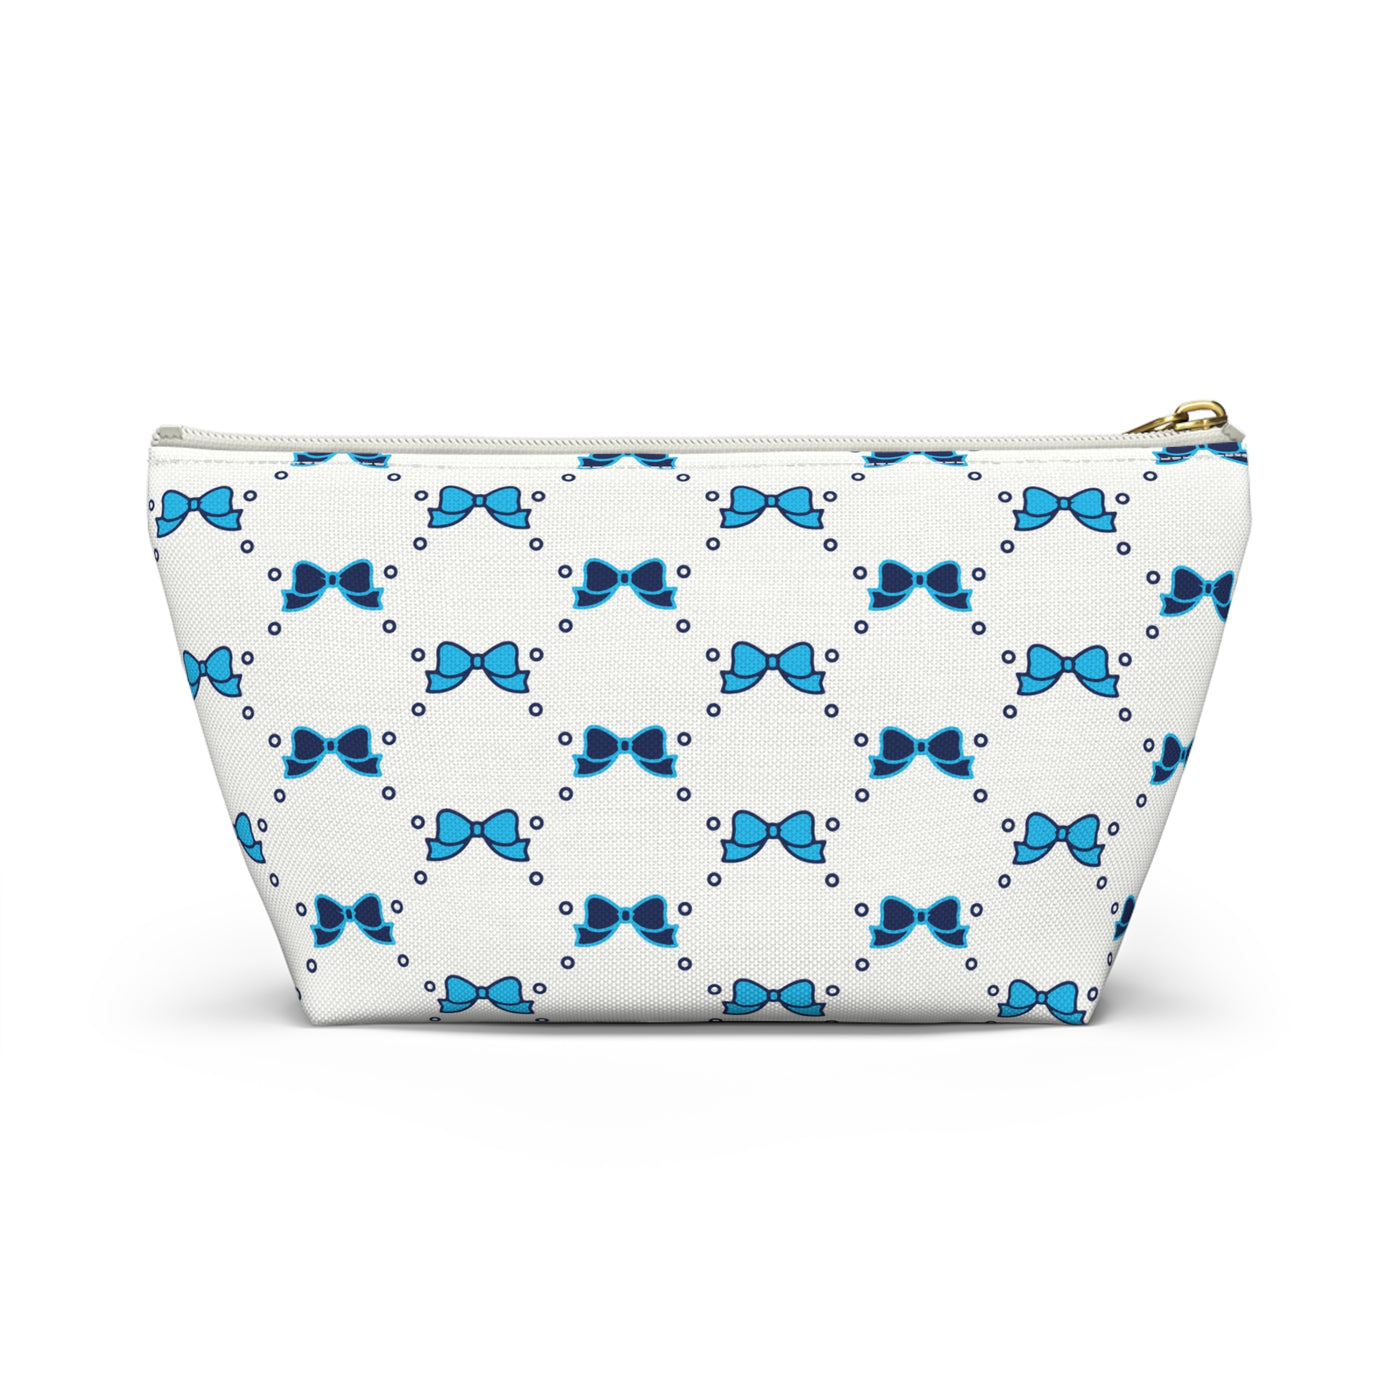 Pretty Little Bow Makeup Bag - Graduation Gift, Bed Party Gift, Acceptance Gift, College Gift, Bow Aesthetic, Villanova, PSU, Blue Bow